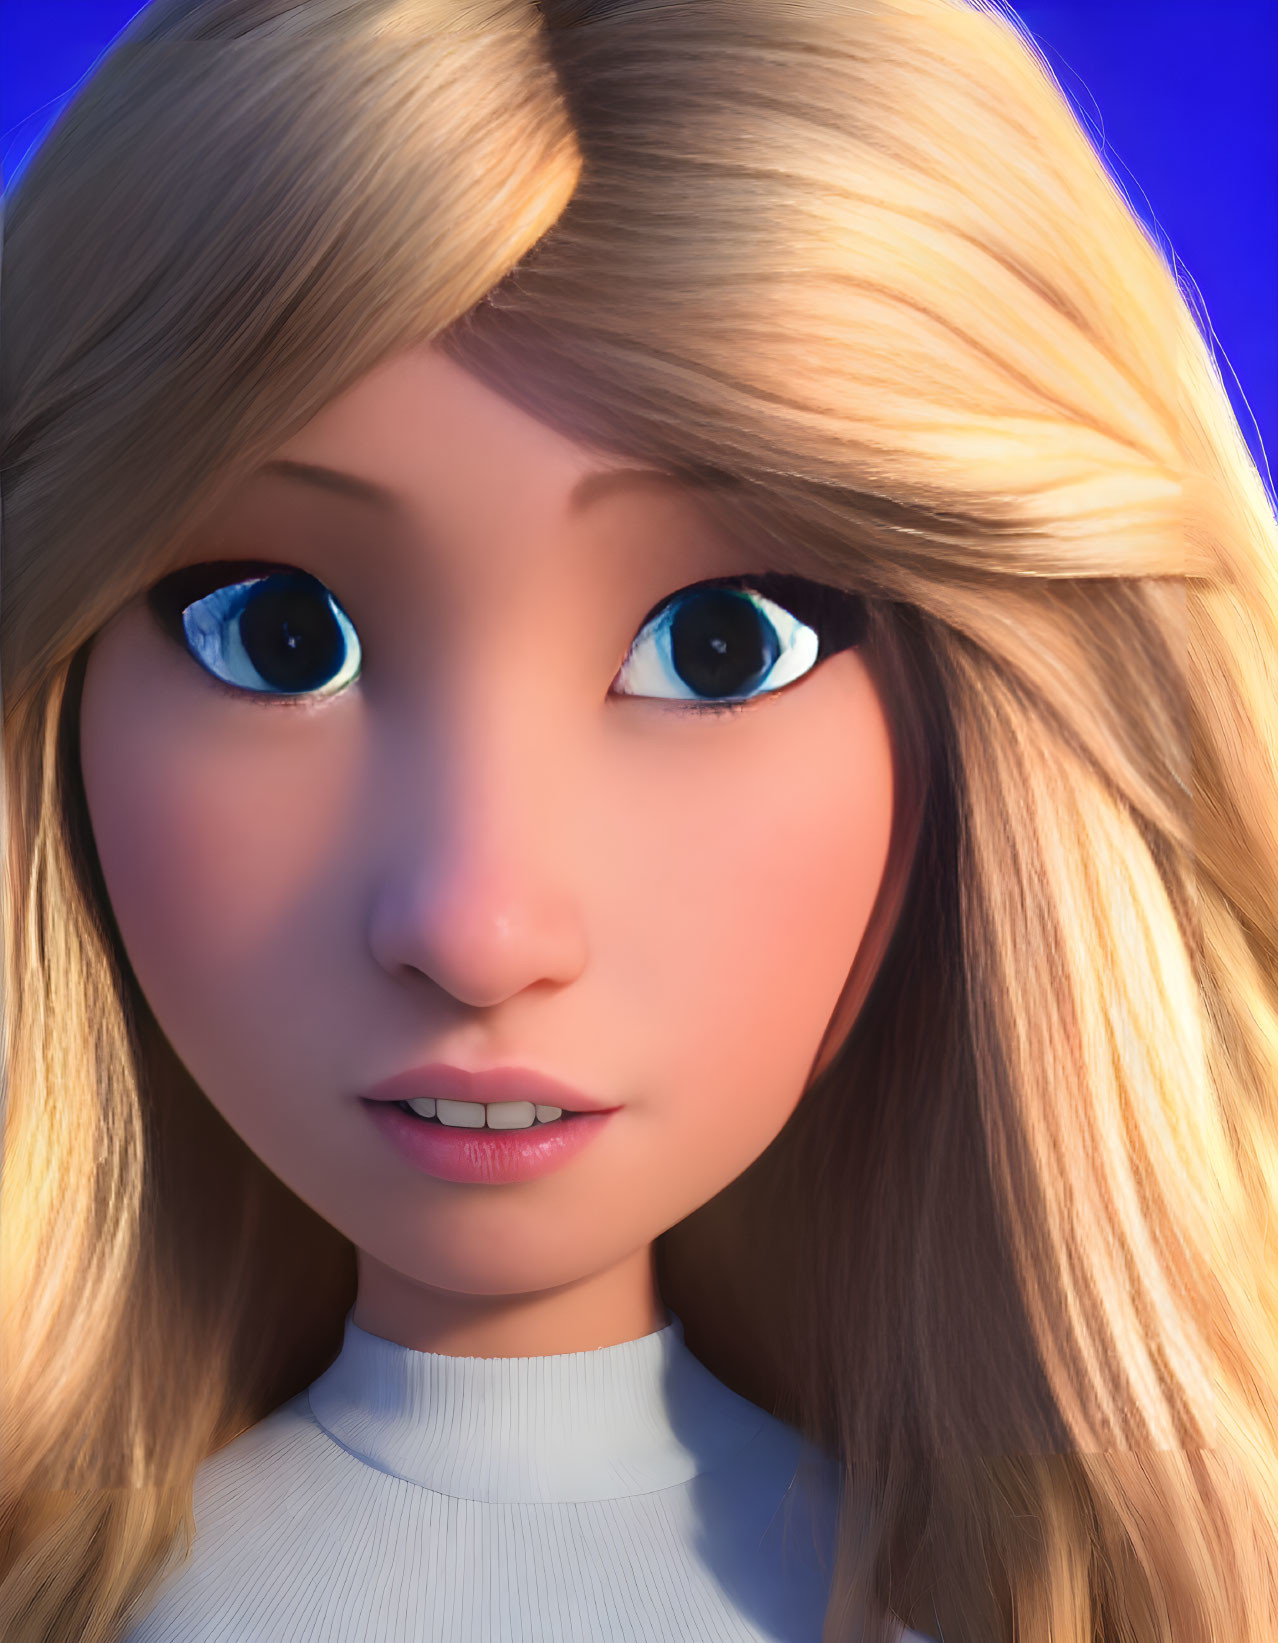 3D animated female character with blue eyes and blonde hair on blue background